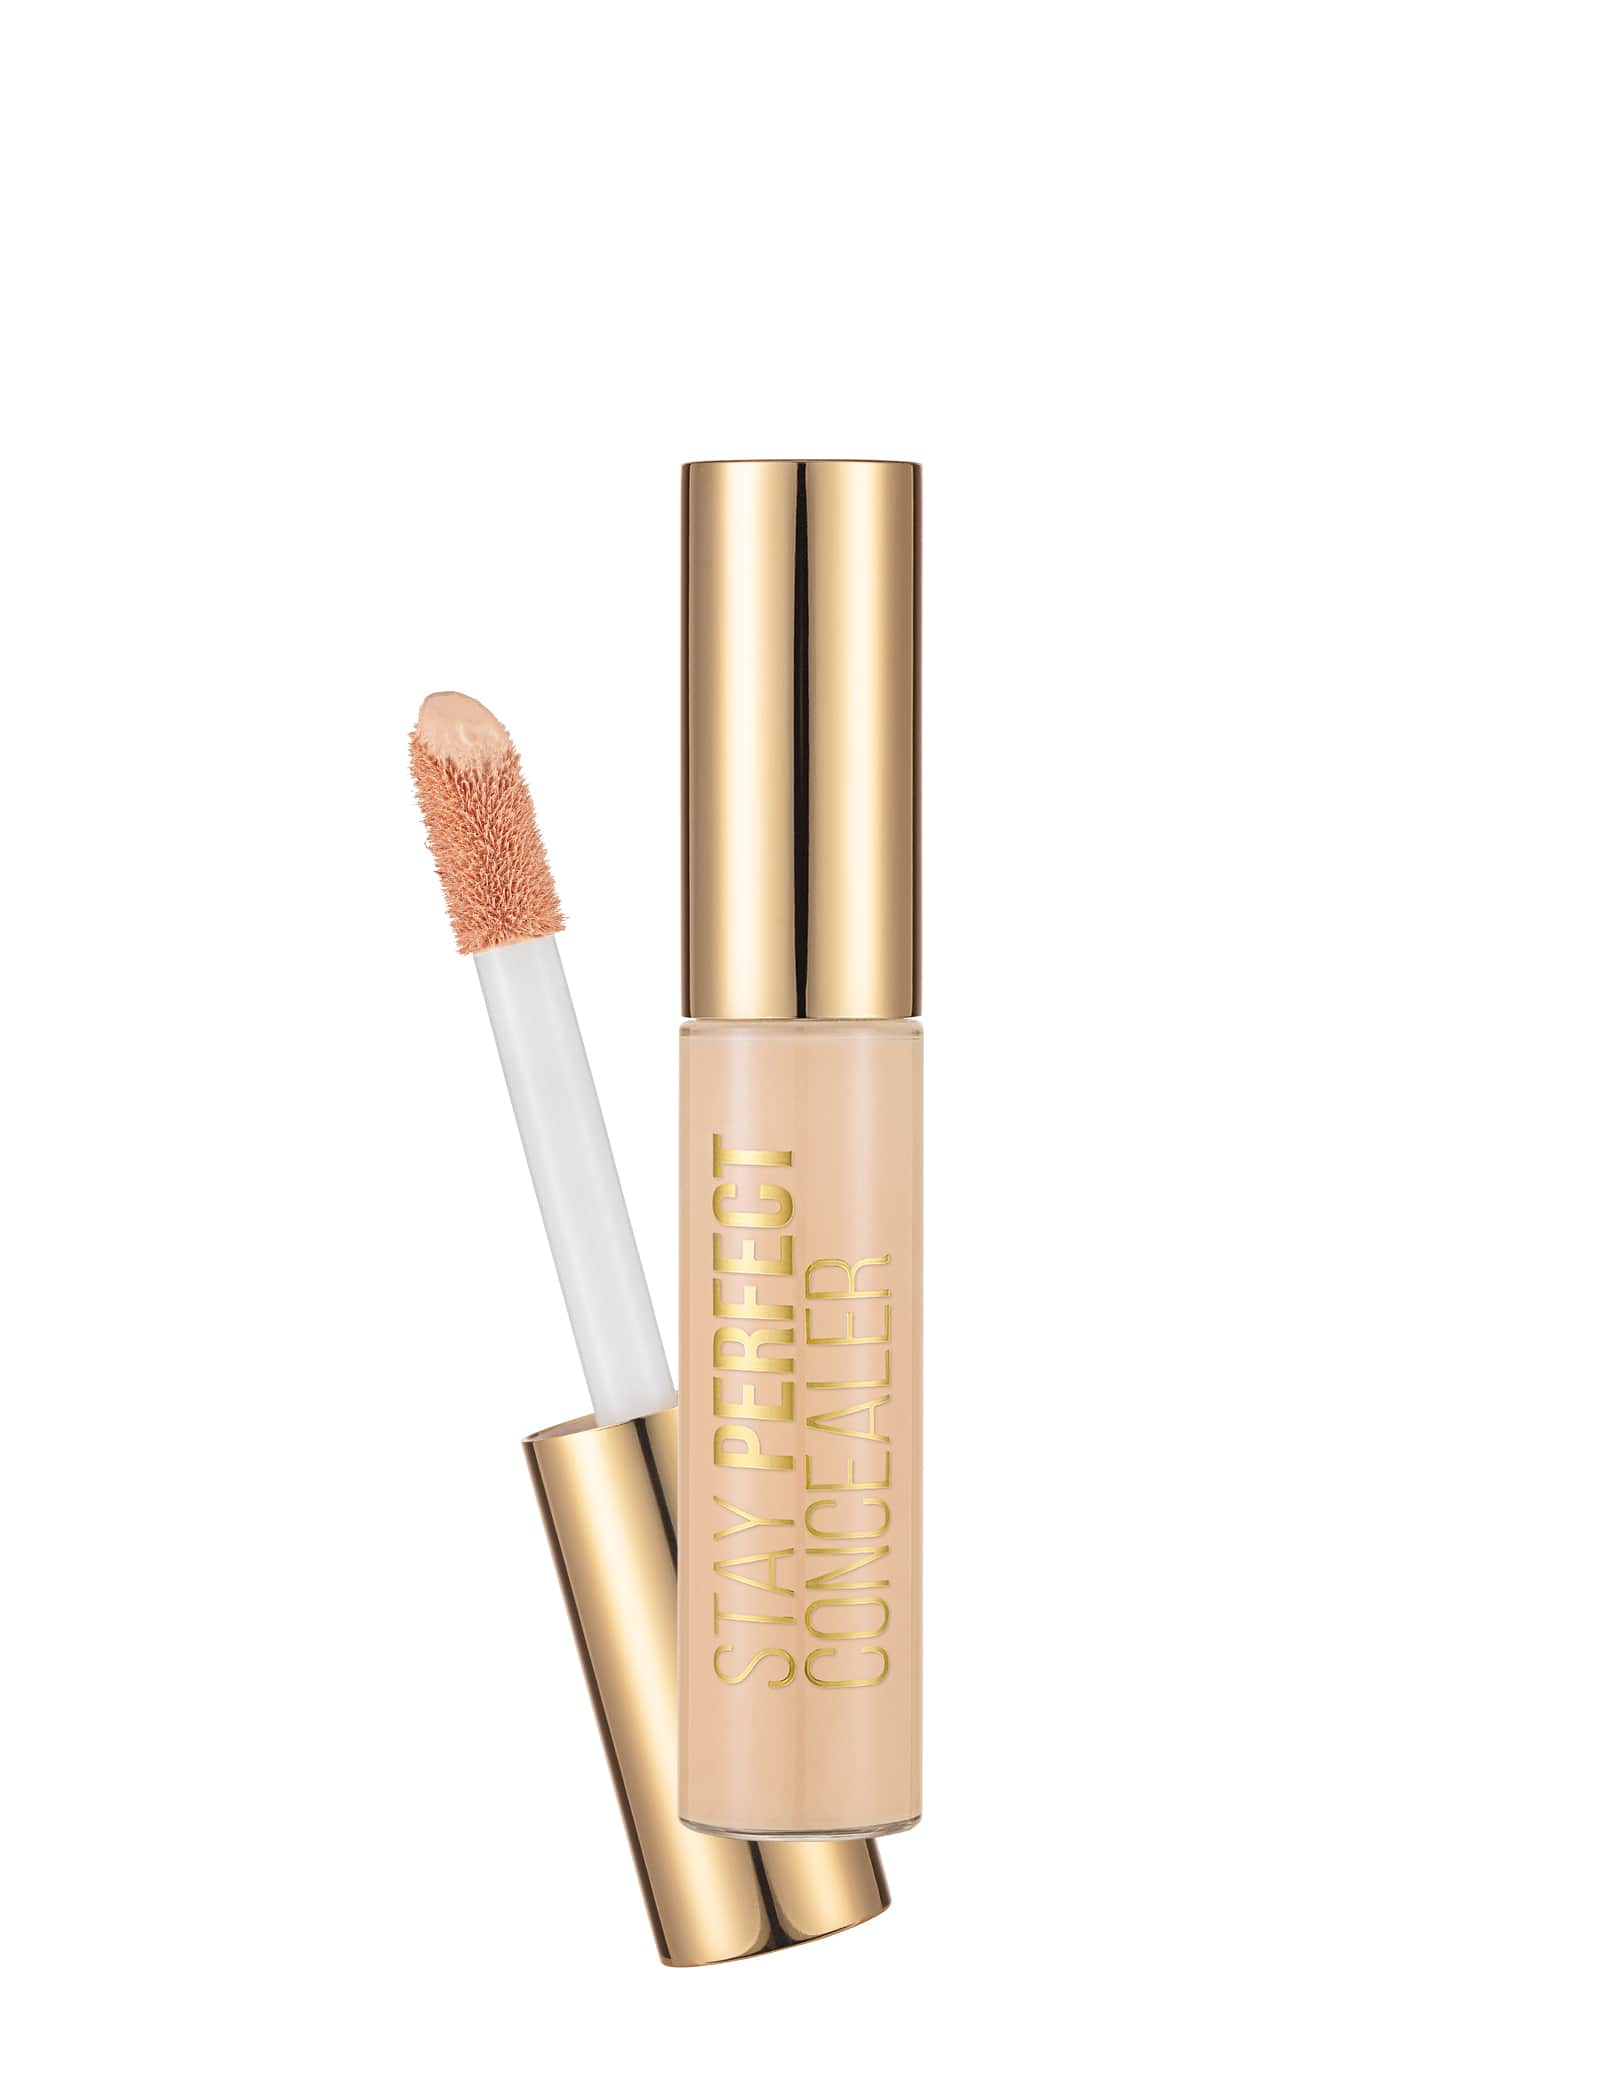 Stay Perfect Concealer 004 Ivory